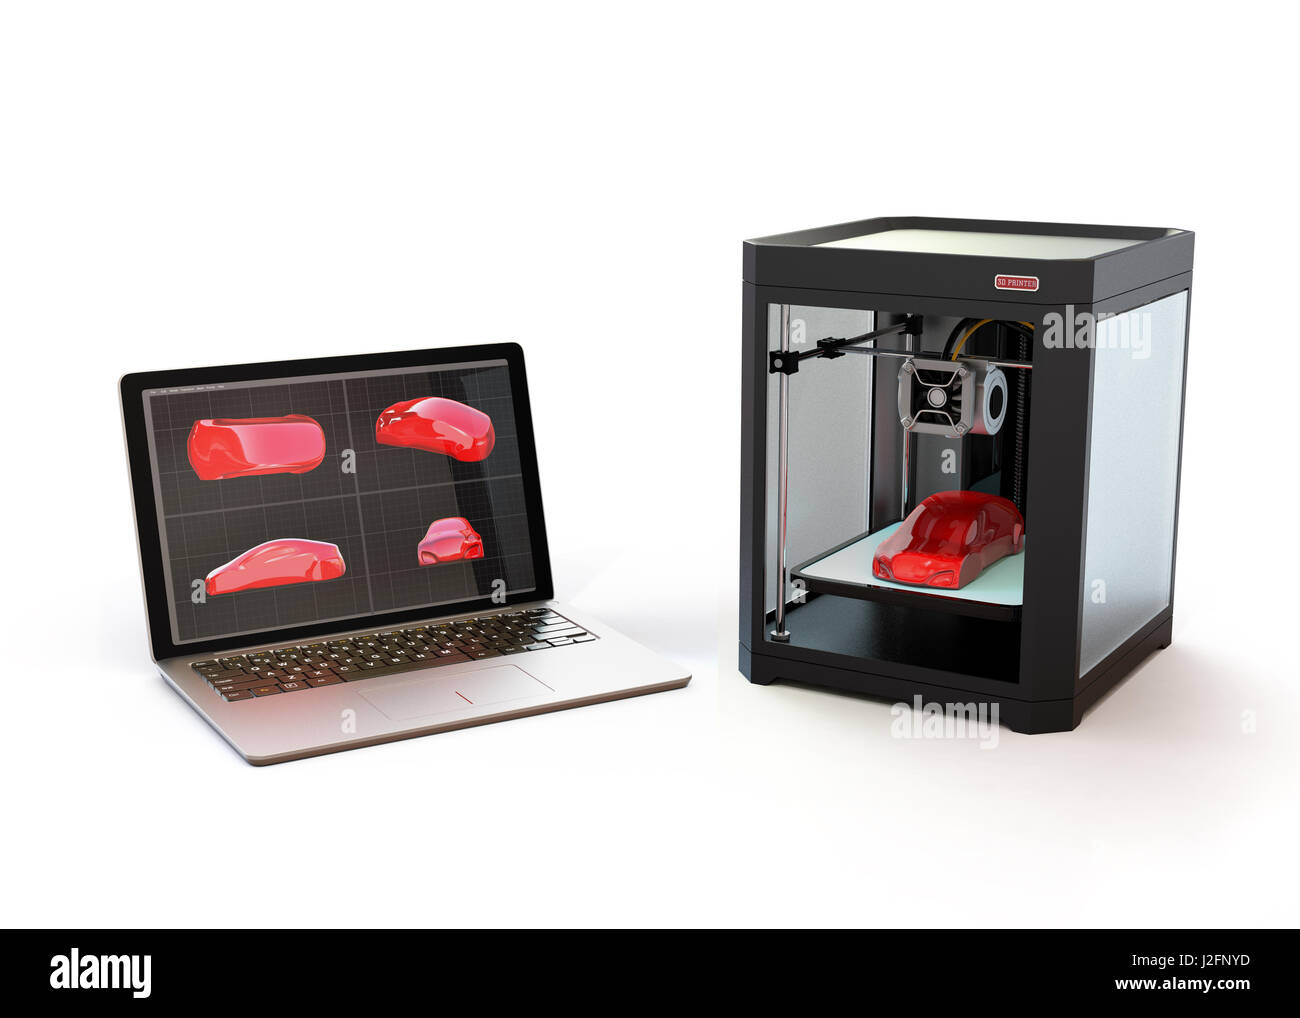 3D printer and laptop computer isolated on white background. 3D rendering image. Stock Photo